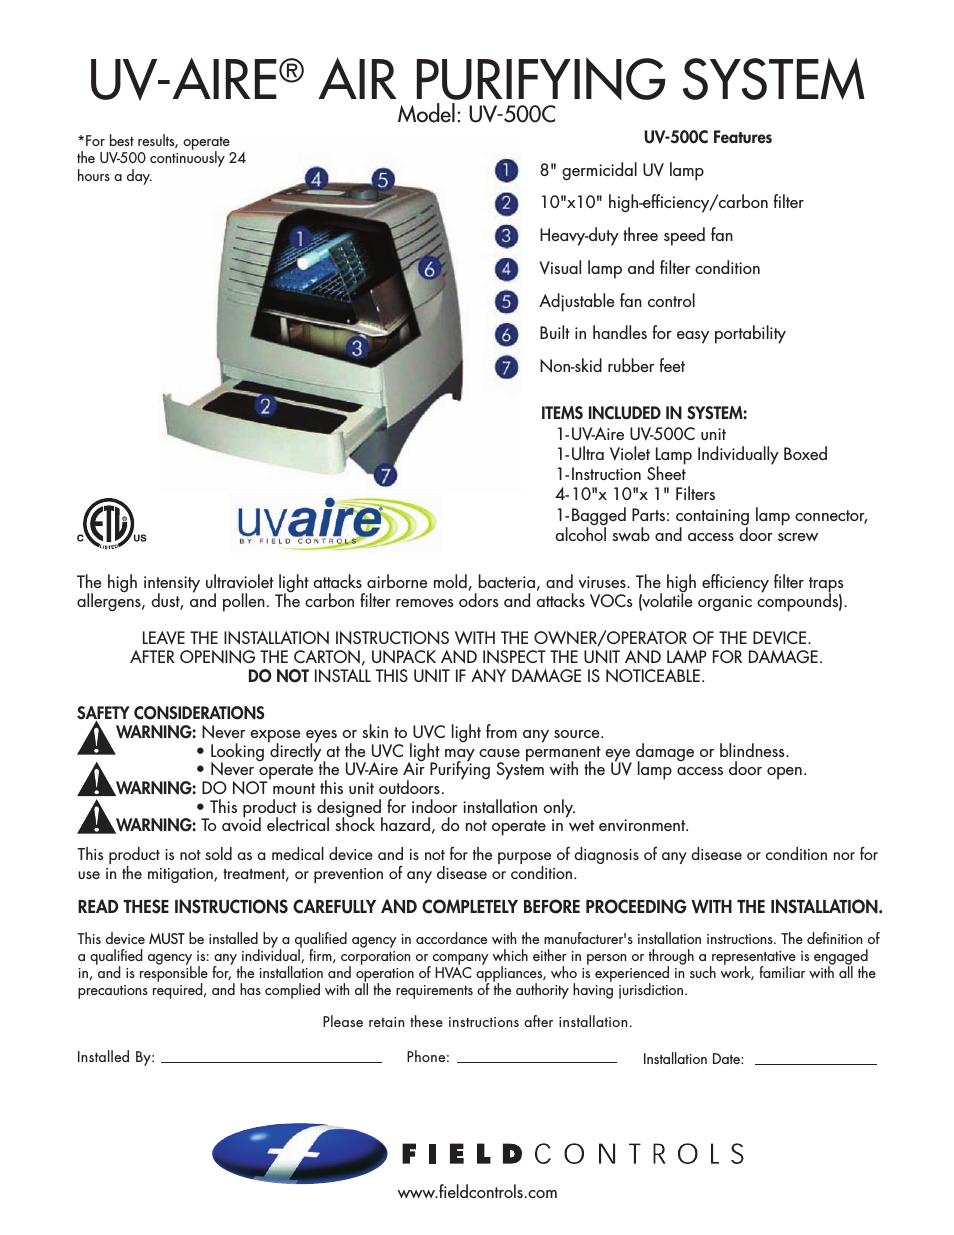 UV-Aire Air Purifying System UV-500C